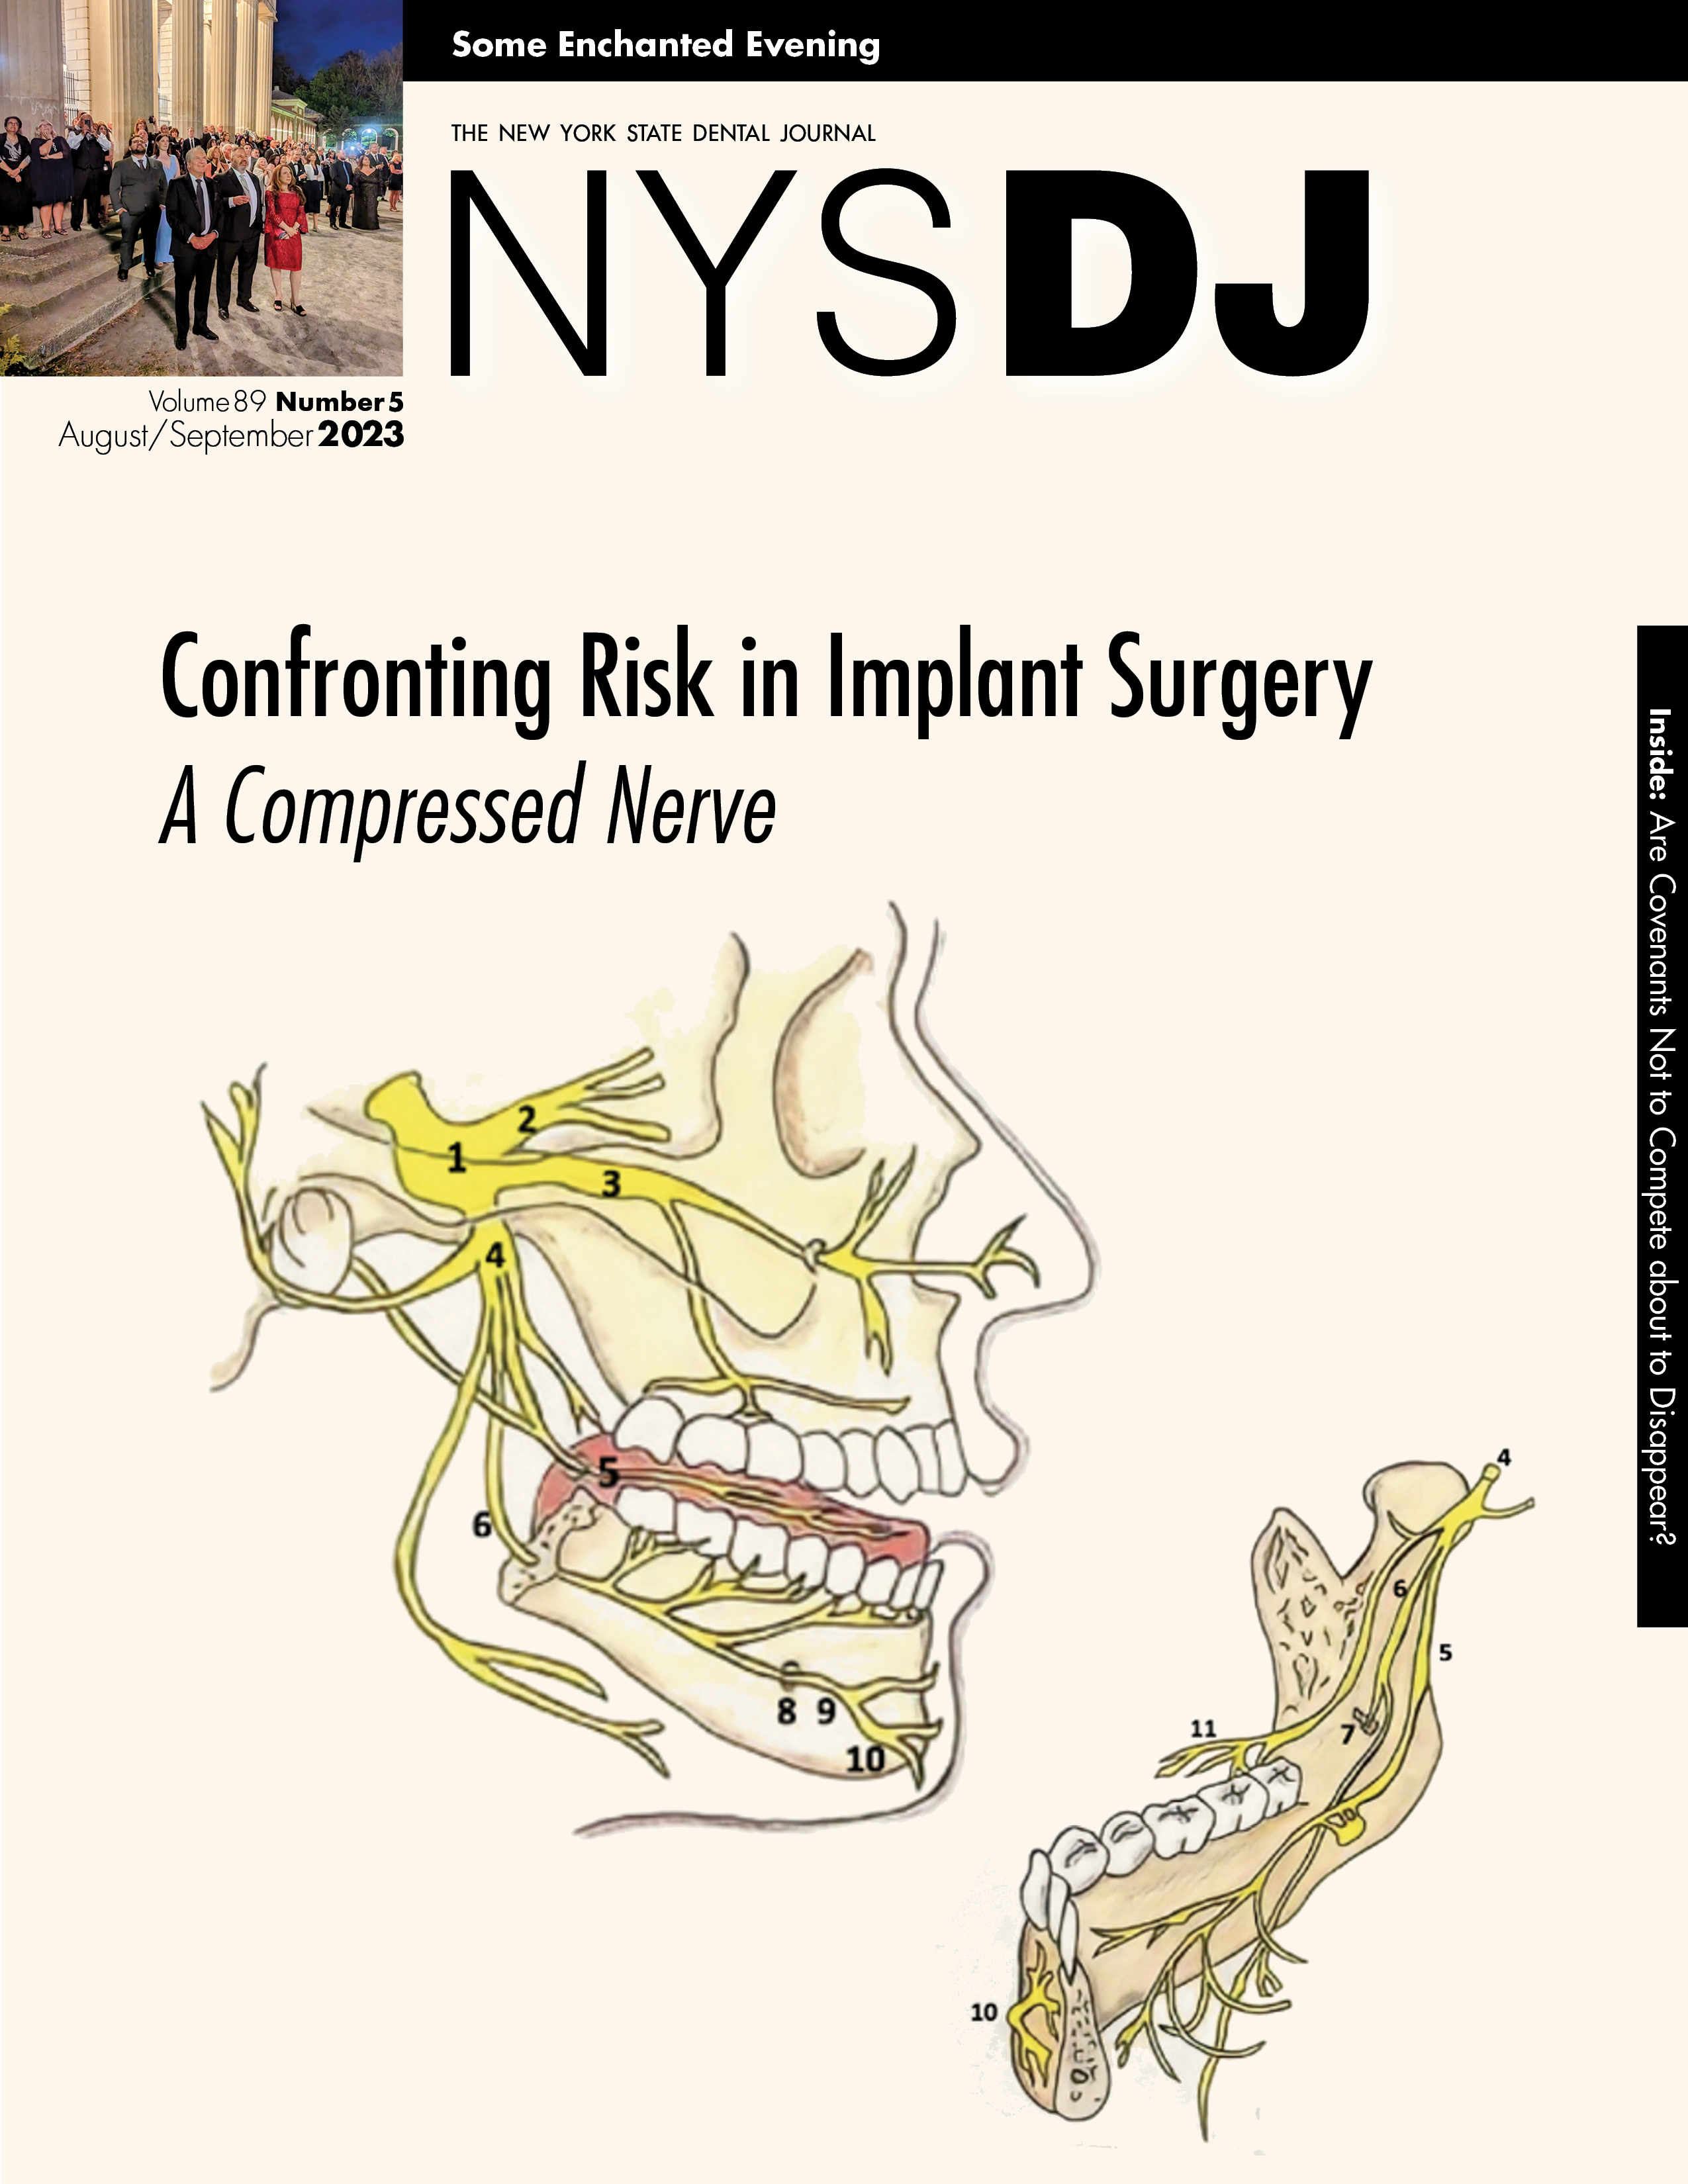 Cover of the NYSDJ with a side-view illustration of a compressed inferior alveolar nerve.